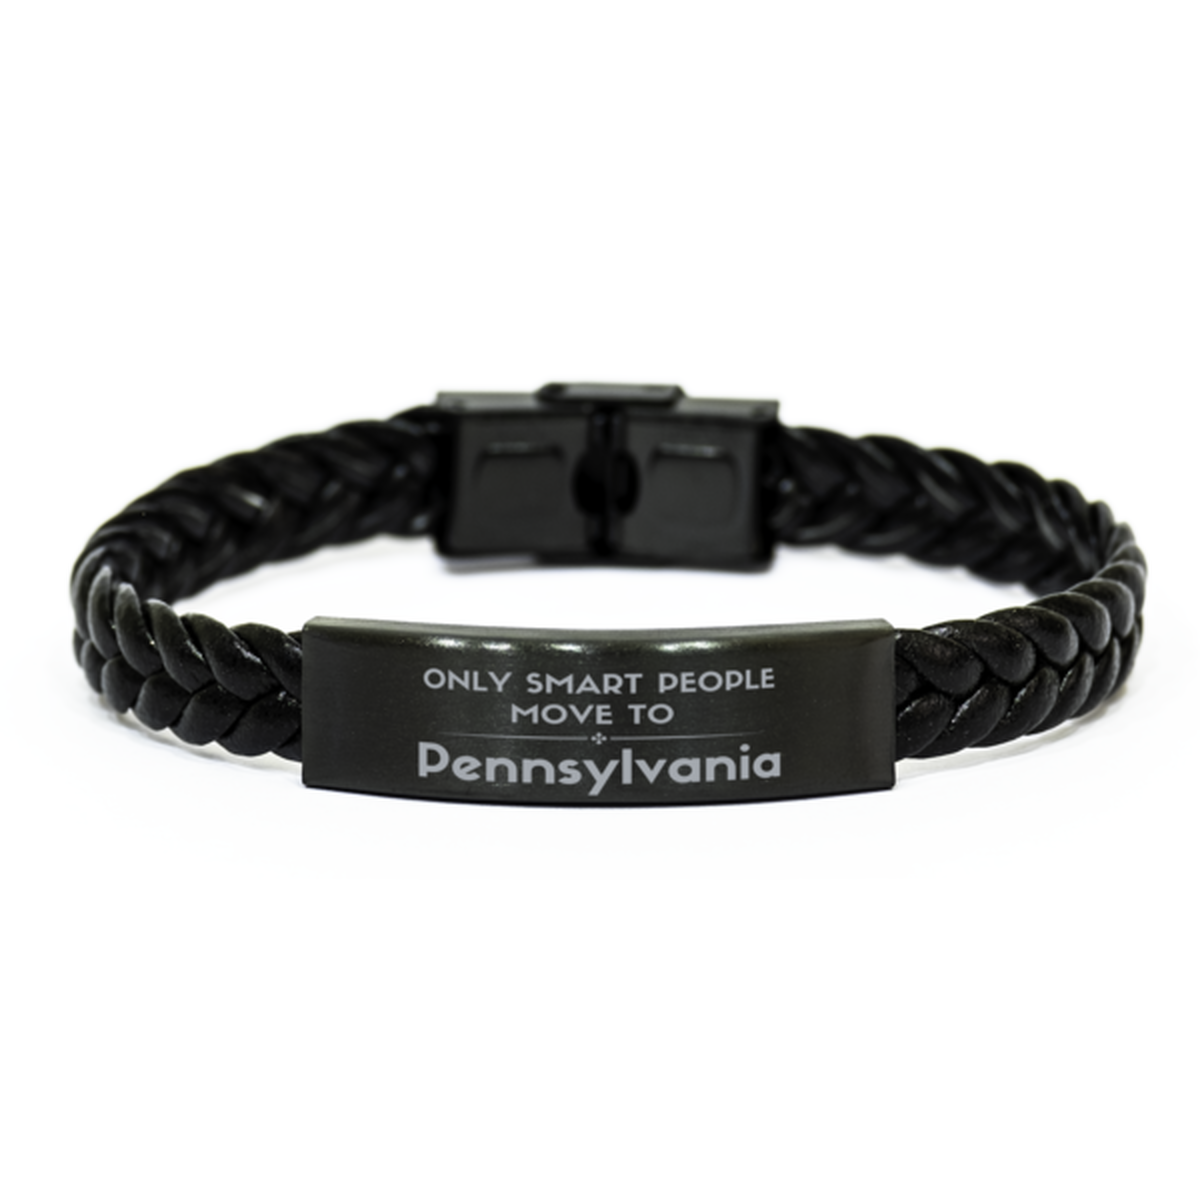 Only smart people move to Pennsylvania Braided Leather Bracelet, Gag Gifts For Pennsylvania, Move to Pennsylvania Gifts for Friends Coworker Funny Saying Quote